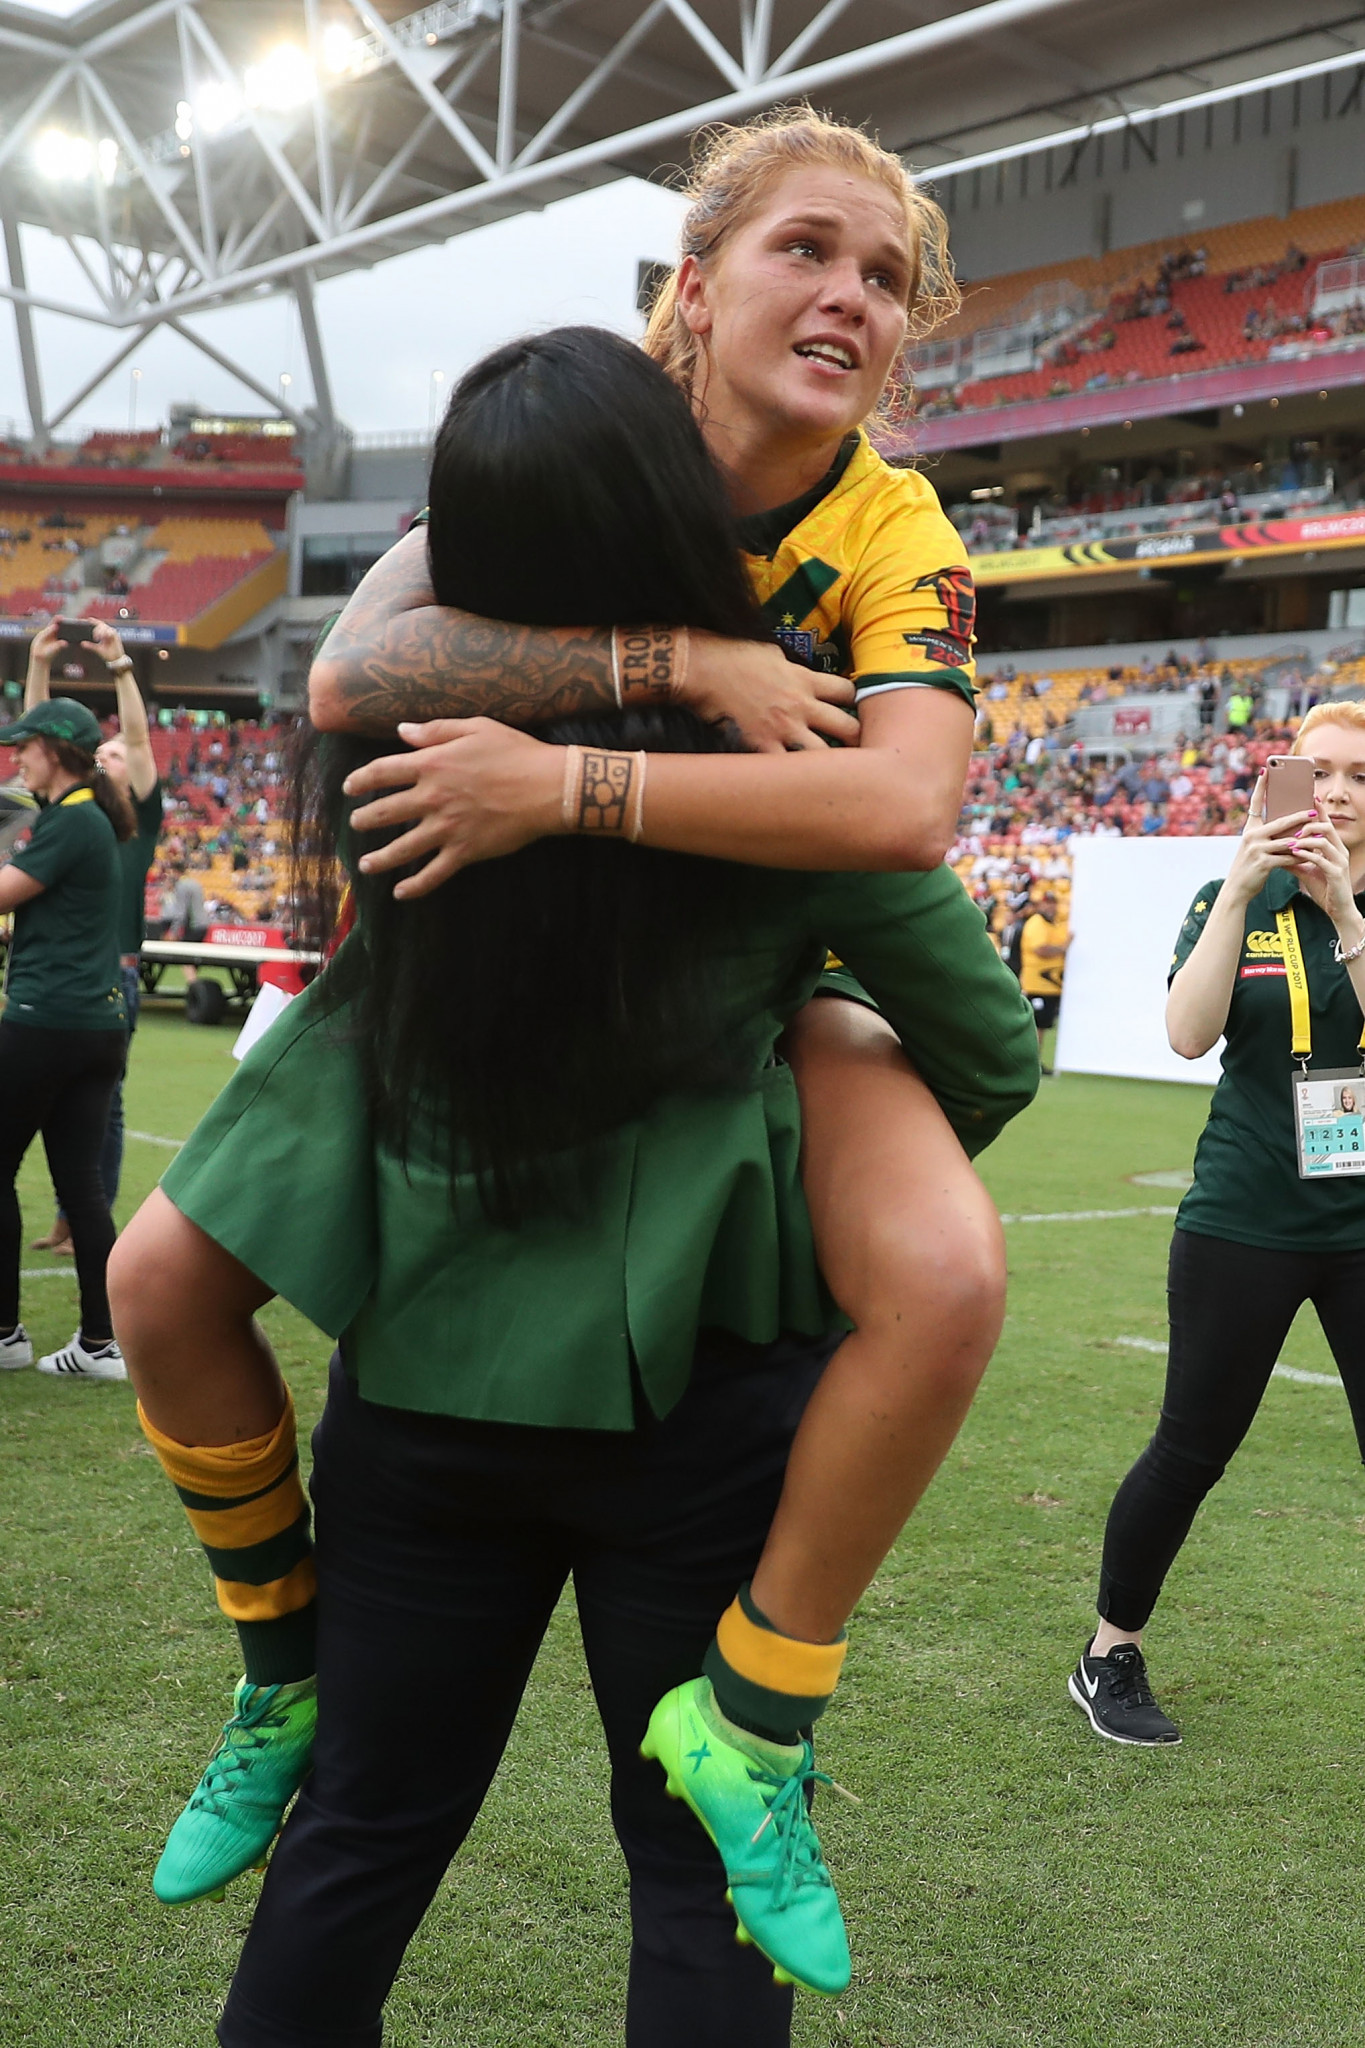 Caitlin Moran helped Australia win the Women's Rugby League World Cup in 2017 ©Getty Images